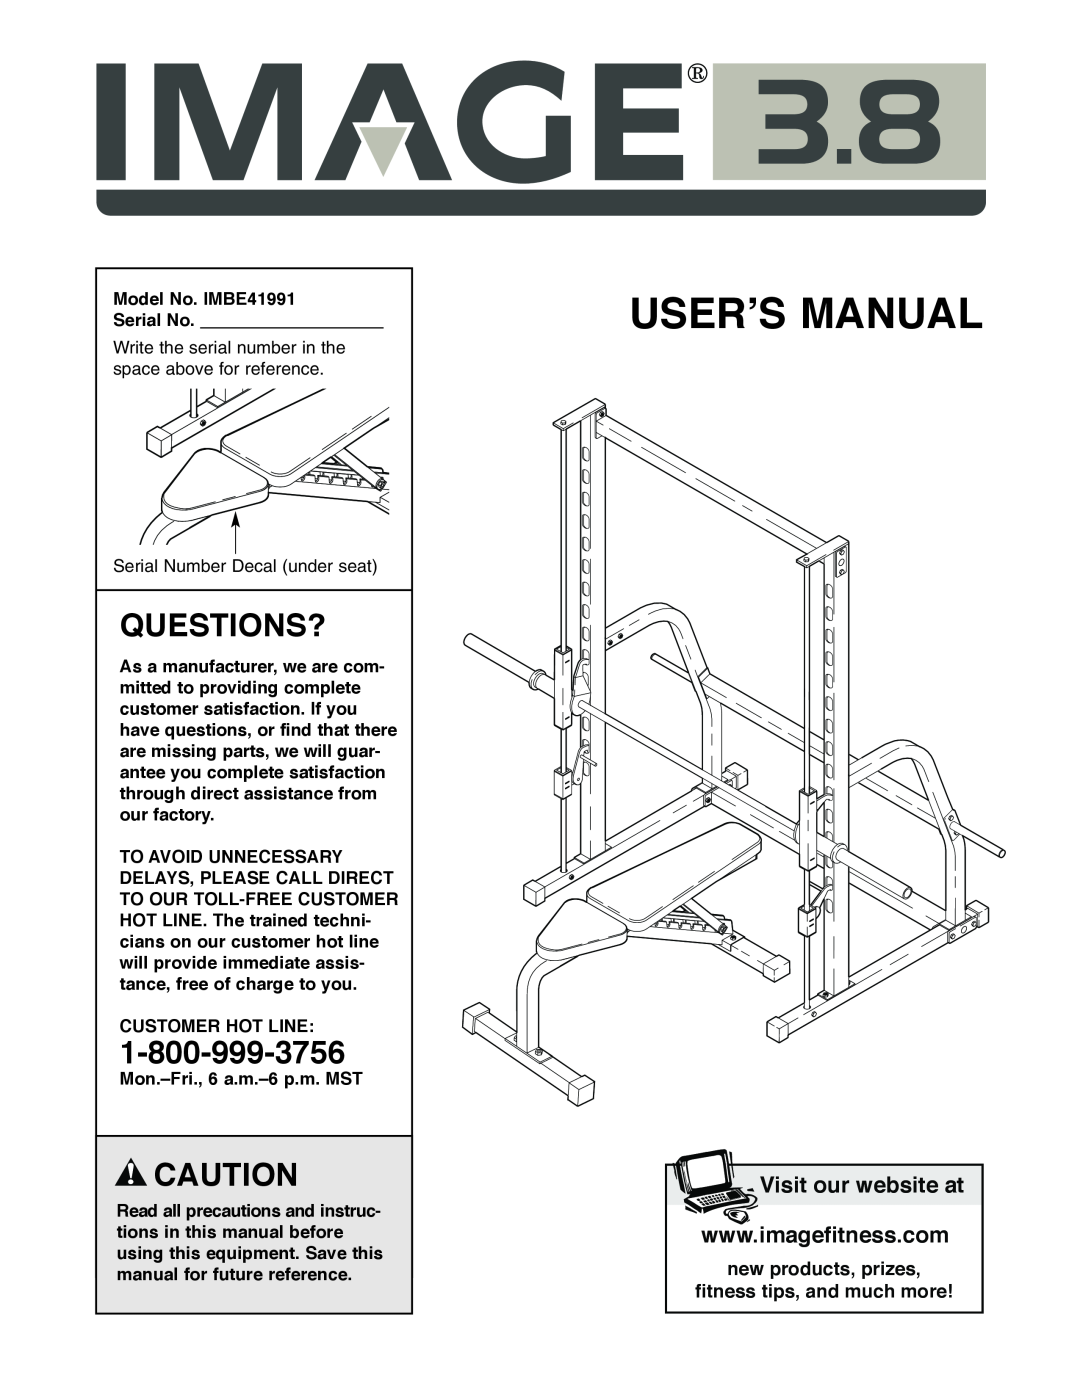 Image 3.8 user manual User’S Manual, Questions?, Visit our website at, new products, prizes fitness tips, and much more 